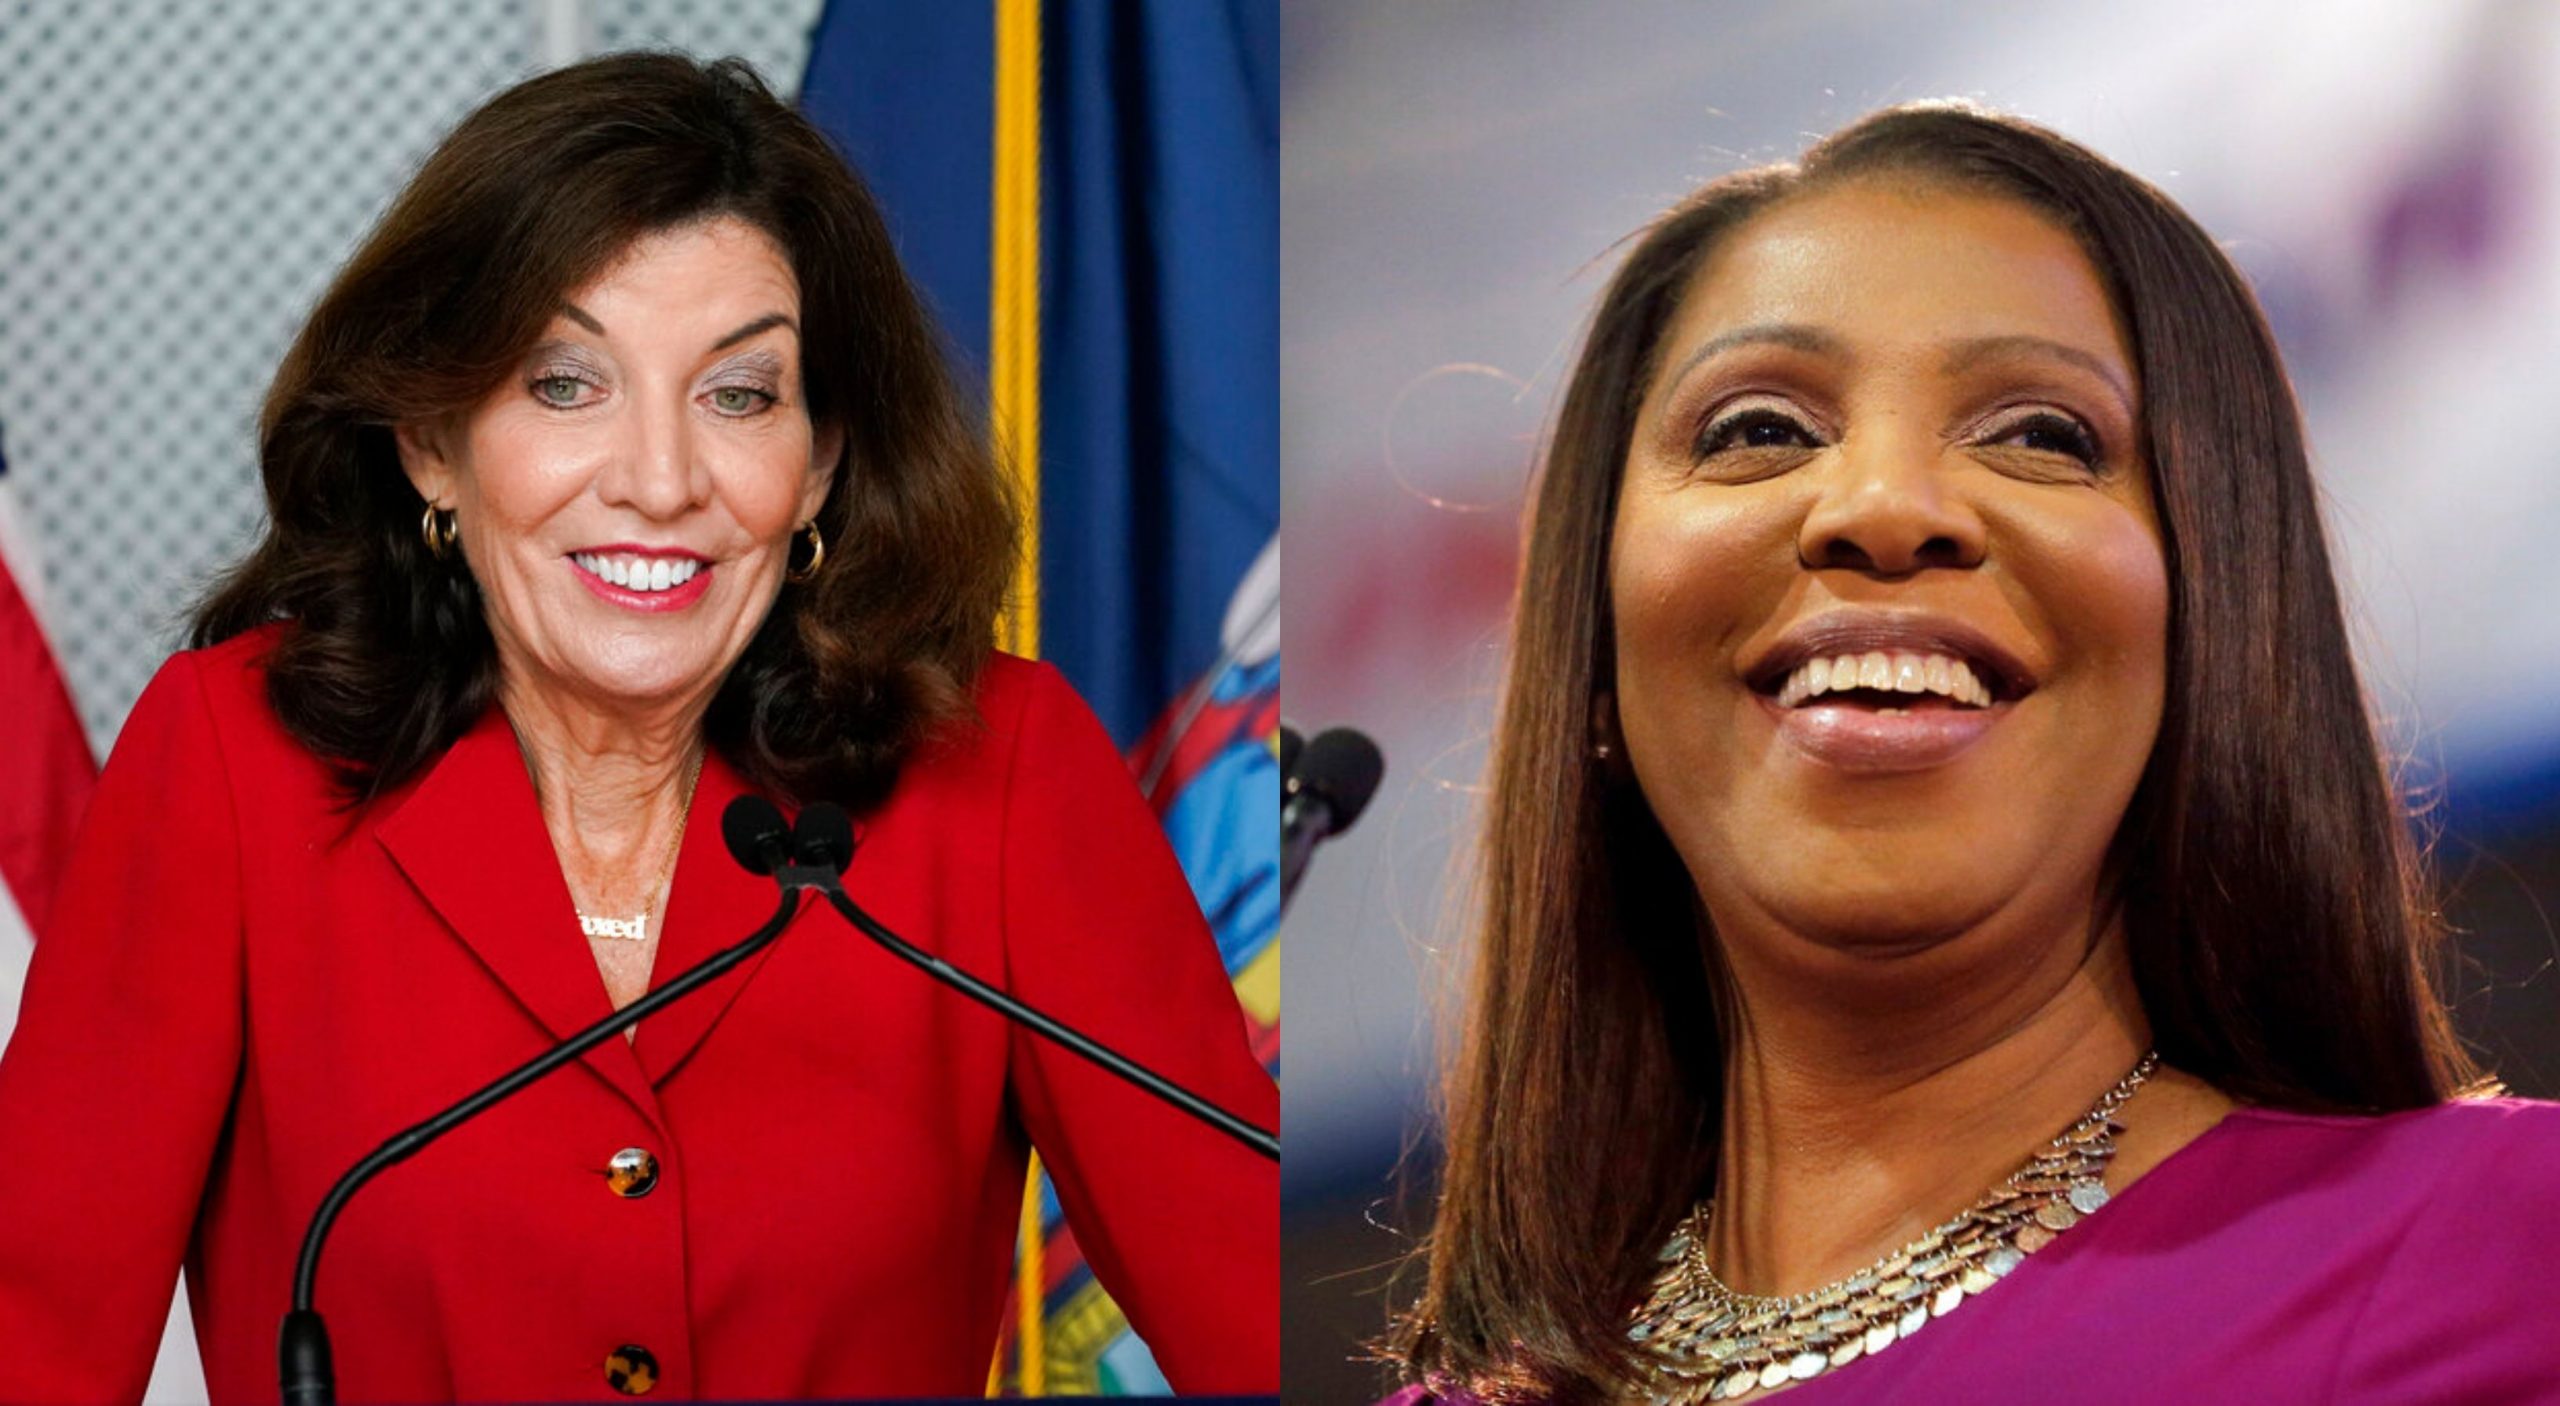 2 women running for governor, history in post-Andrew Cuomo New York